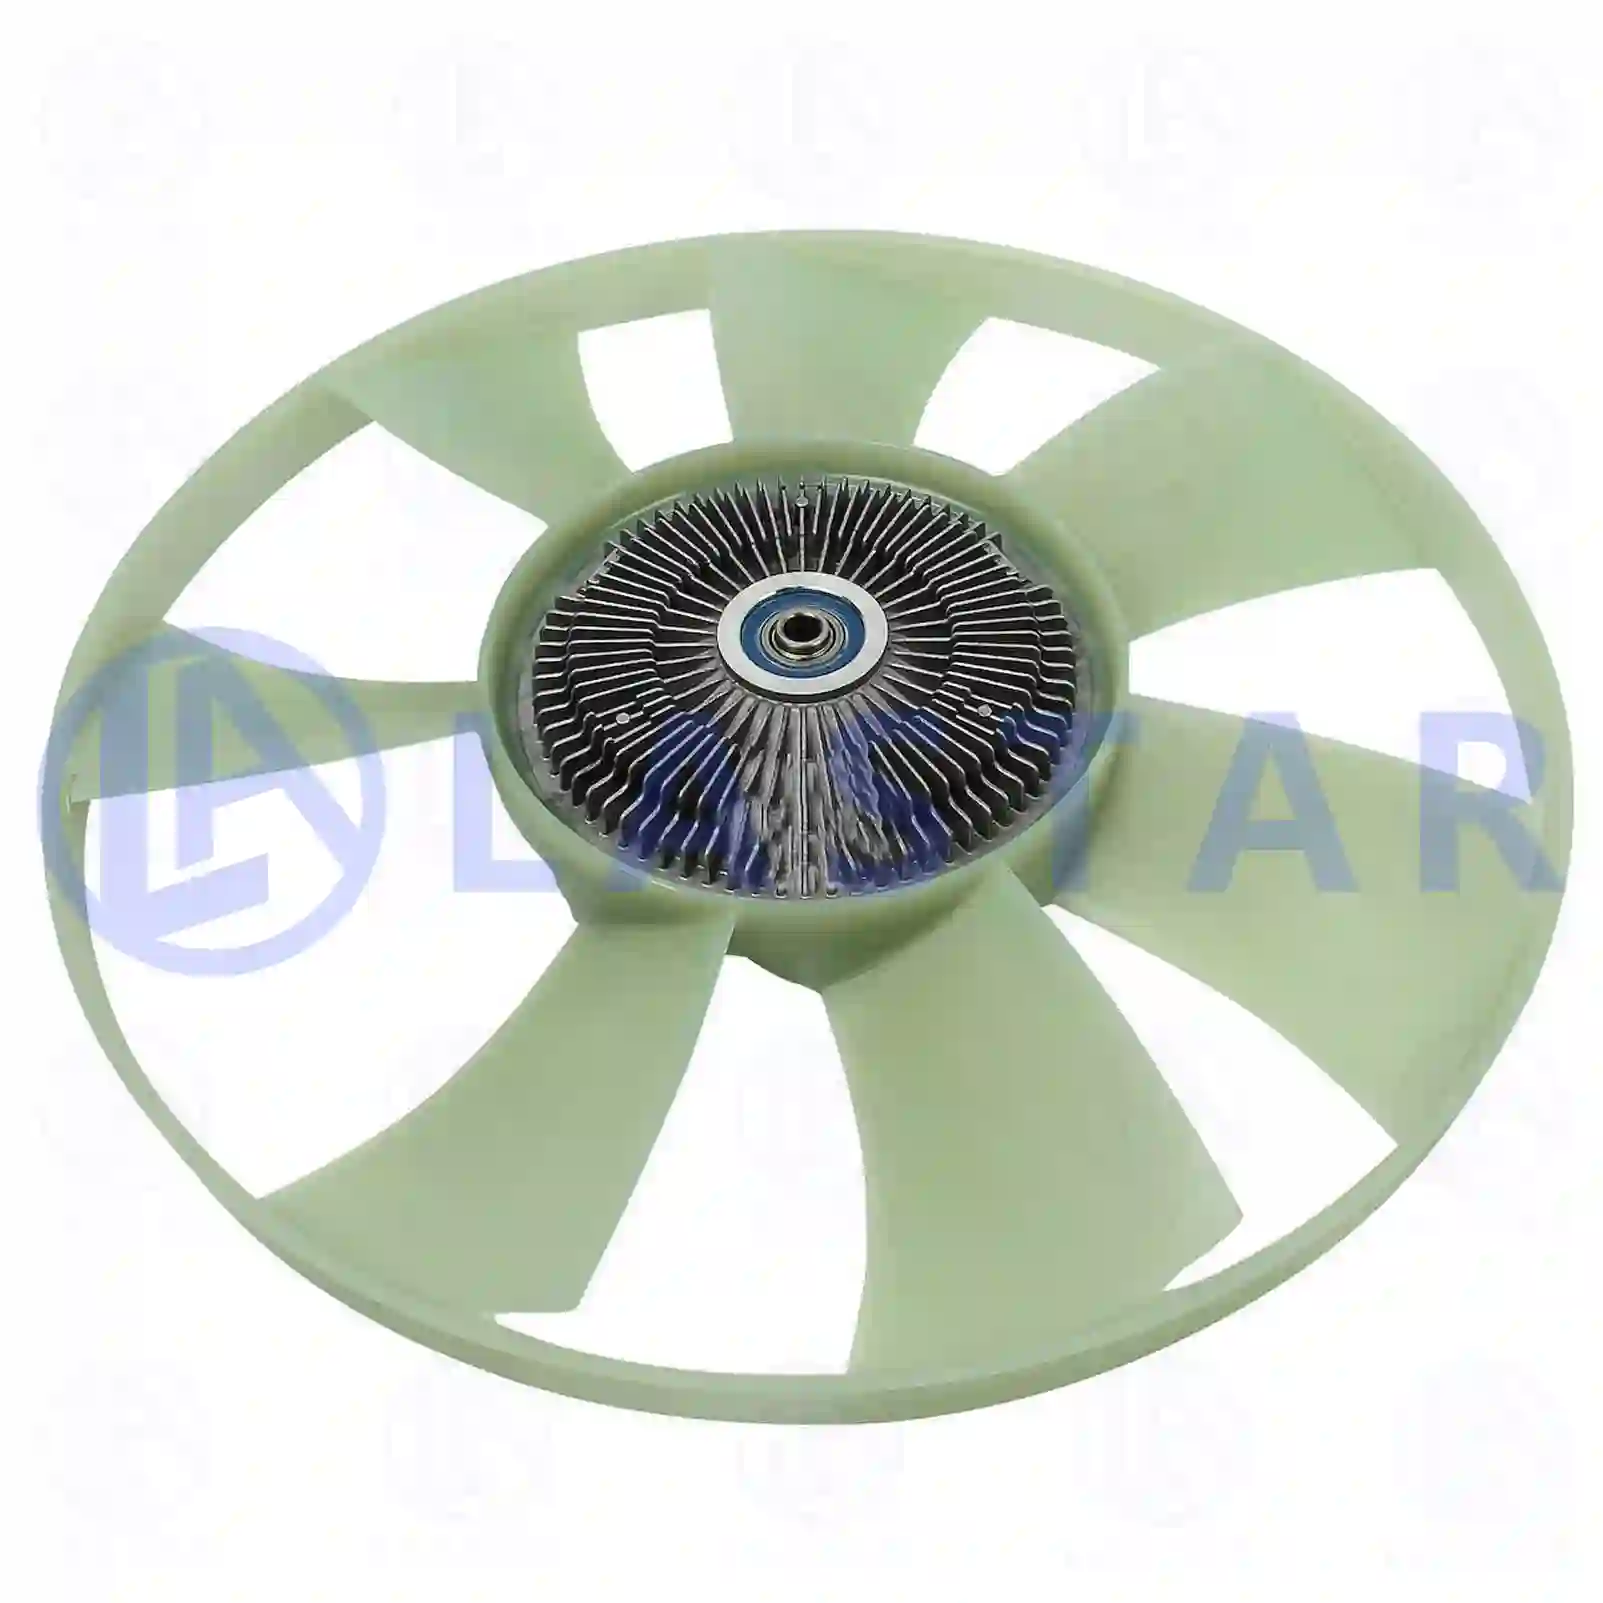 Fan with clutch, 77708102, 076121301A, 076121301B, 076121301C, 076121301D, 0002008123, 0002009023, 0002009623, 0002009723, 076121301A, 076121301B, 076121301C, 076121301D, 076121301A, 076121301B, 076121301C, 076121301D, 076121301B, 076121301C, 076121301D, ZG00398-0008 ||  77708102 Lastar Spare Part | Truck Spare Parts, Auotomotive Spare Parts Fan with clutch, 77708102, 076121301A, 076121301B, 076121301C, 076121301D, 0002008123, 0002009023, 0002009623, 0002009723, 076121301A, 076121301B, 076121301C, 076121301D, 076121301A, 076121301B, 076121301C, 076121301D, 076121301B, 076121301C, 076121301D, ZG00398-0008 ||  77708102 Lastar Spare Part | Truck Spare Parts, Auotomotive Spare Parts